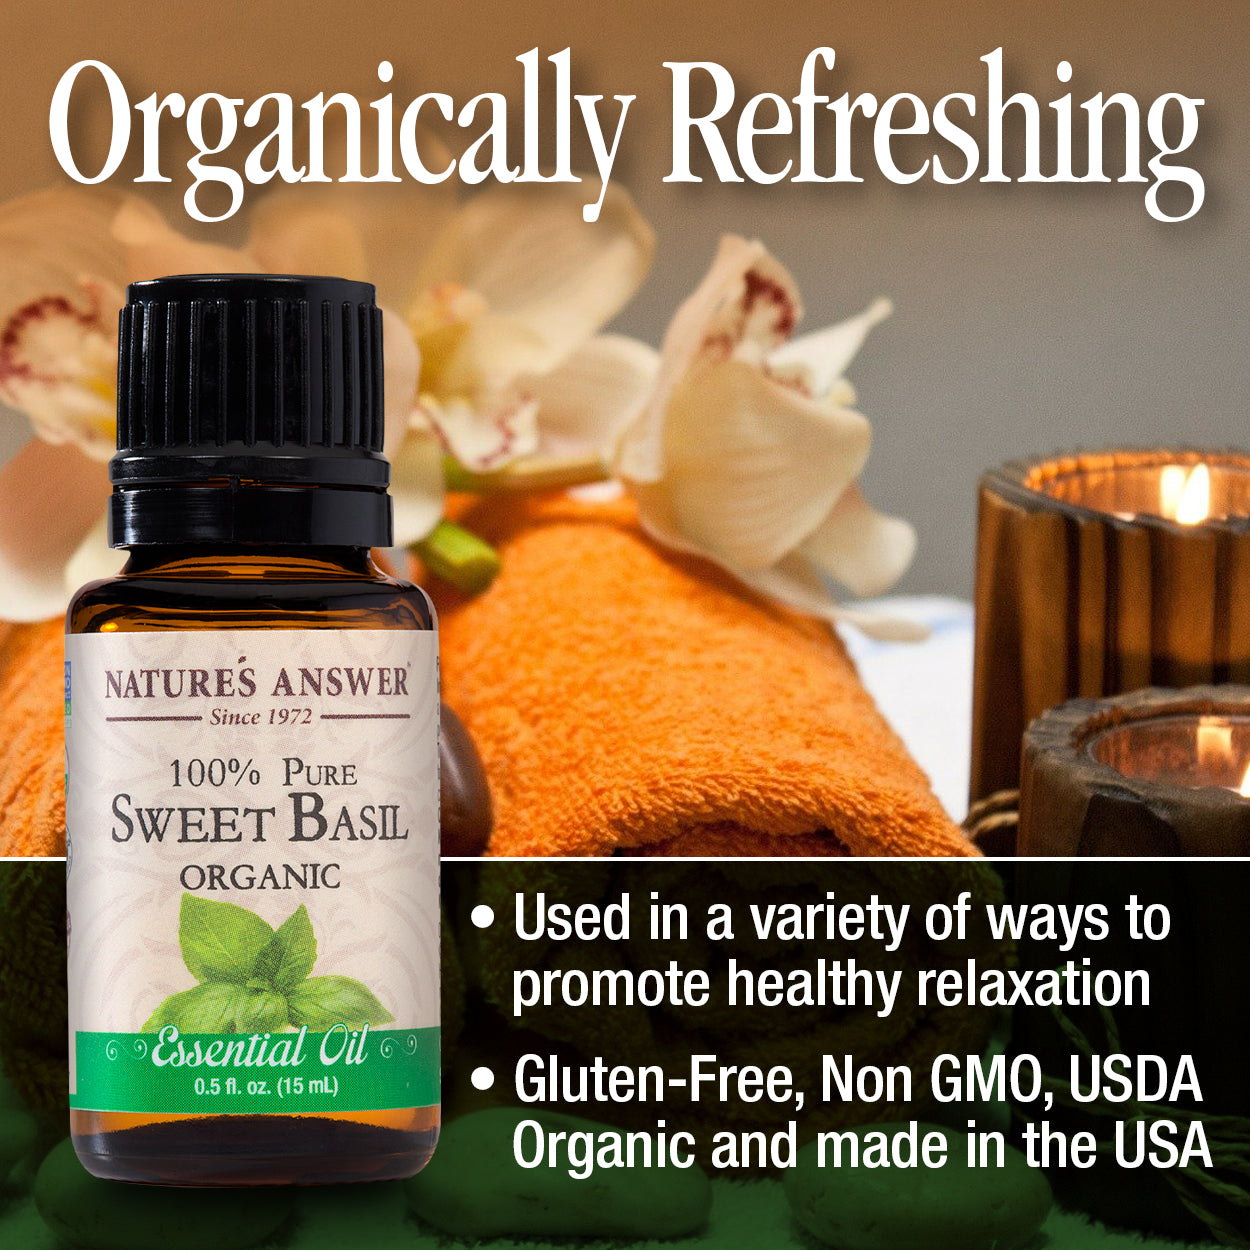 Nature's Answer Sweet Basil Essential Oil Organic